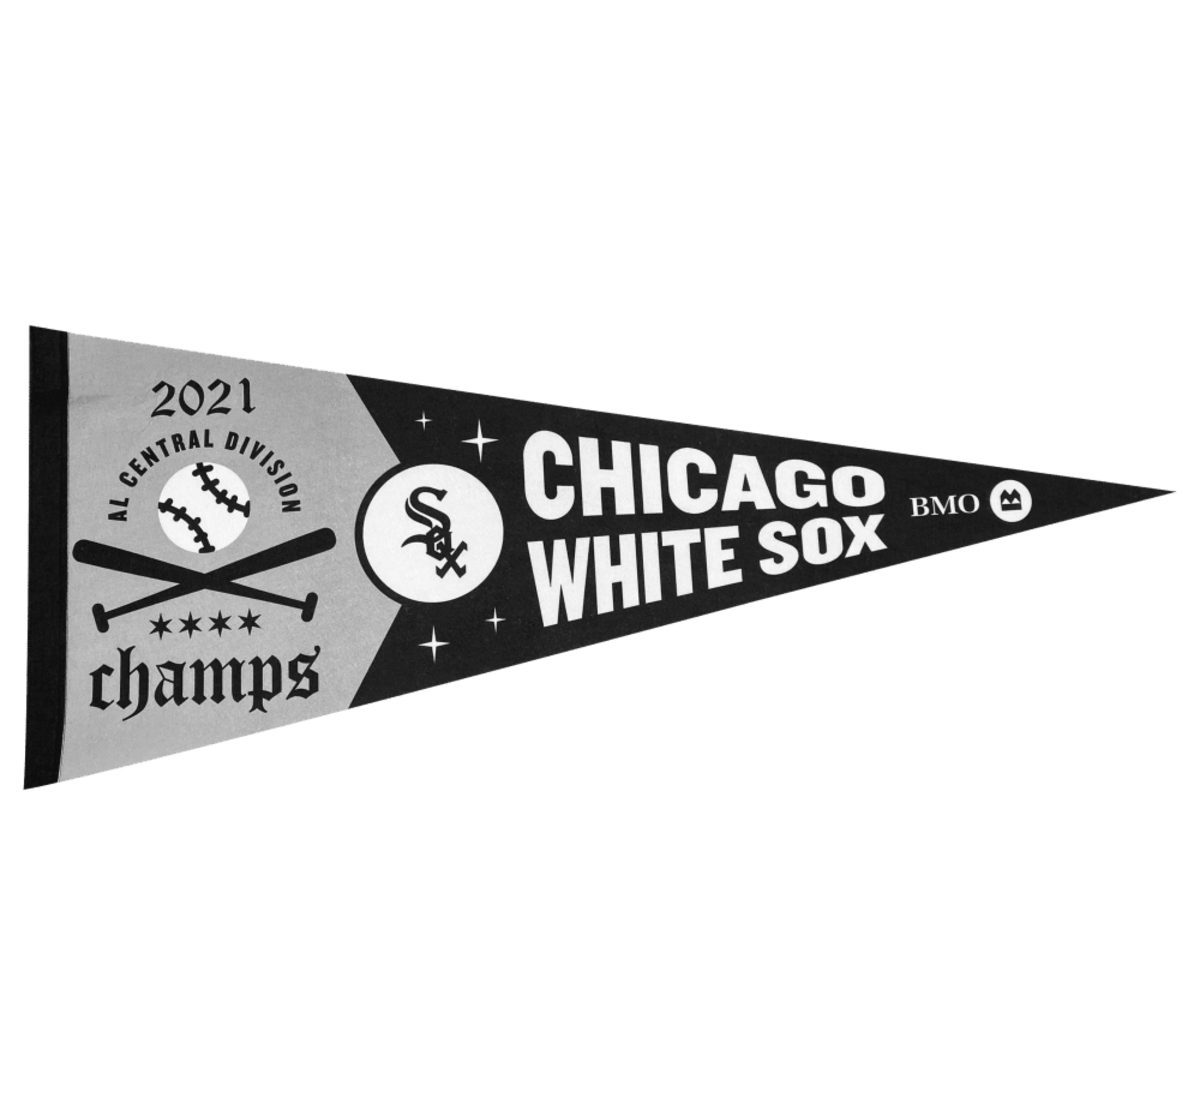 White Sox 2021 AL Central Division Champions Pennant